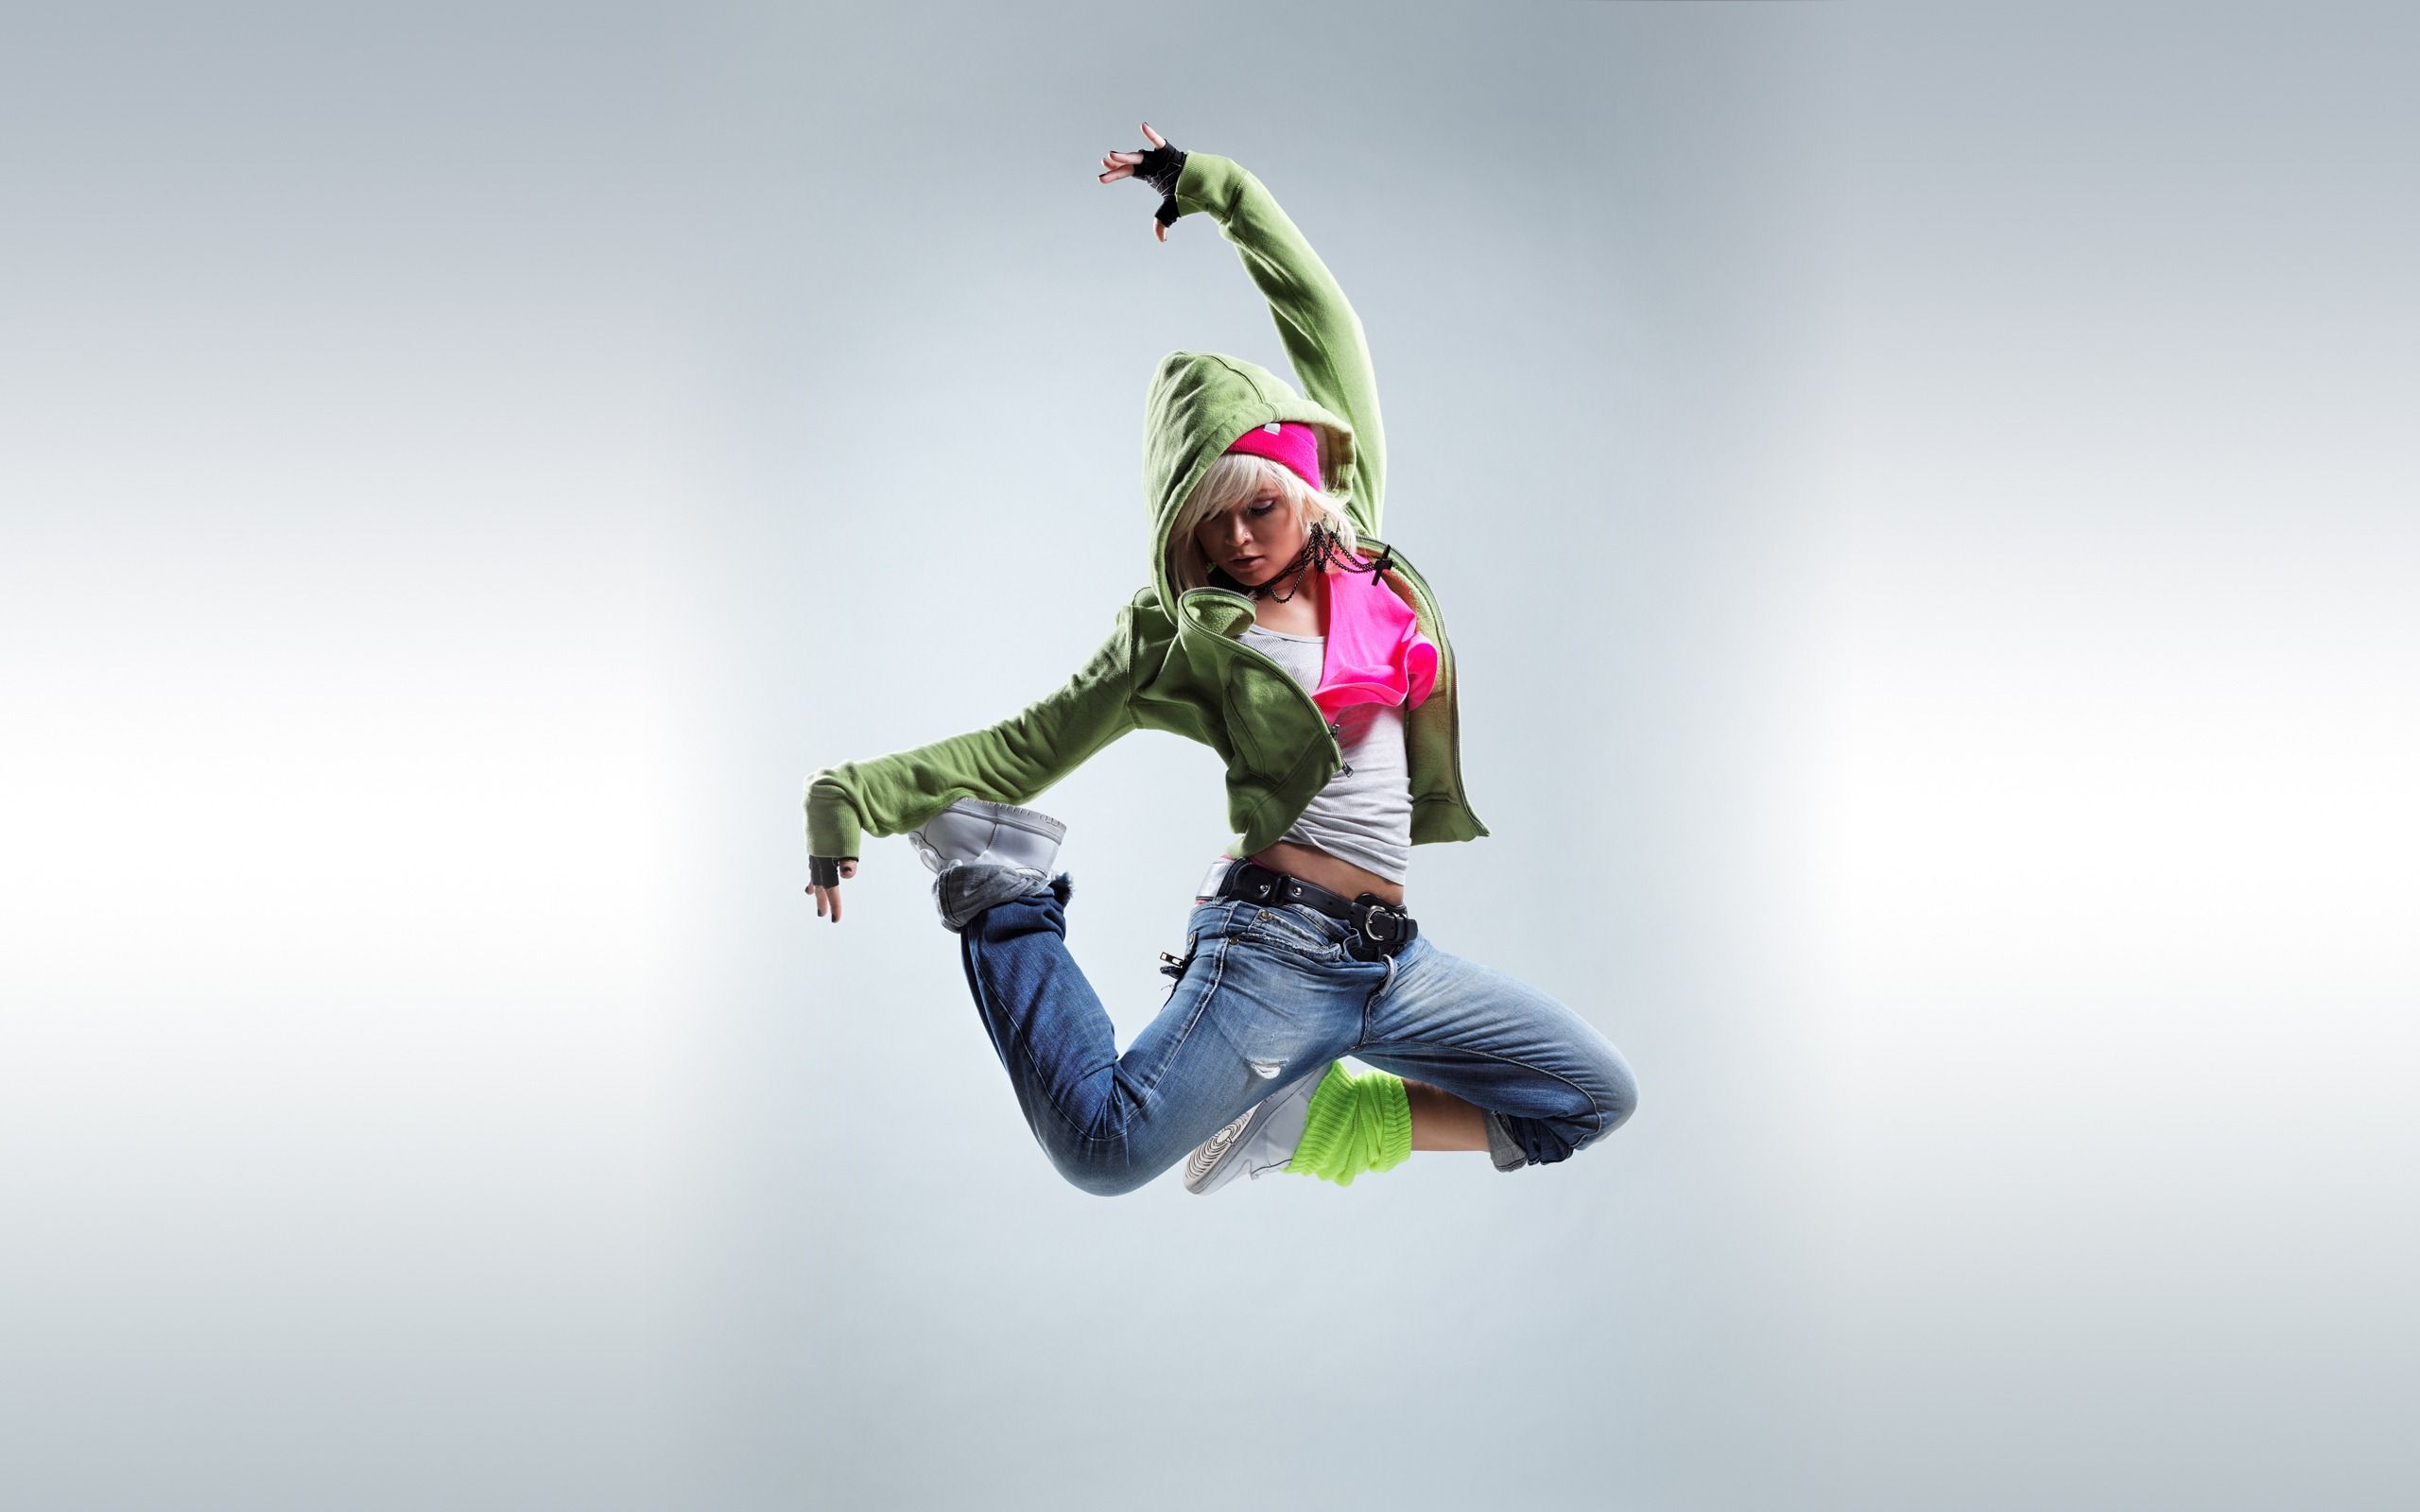 Dance Background Wallpapers 15297 - HD Wallpapers Site